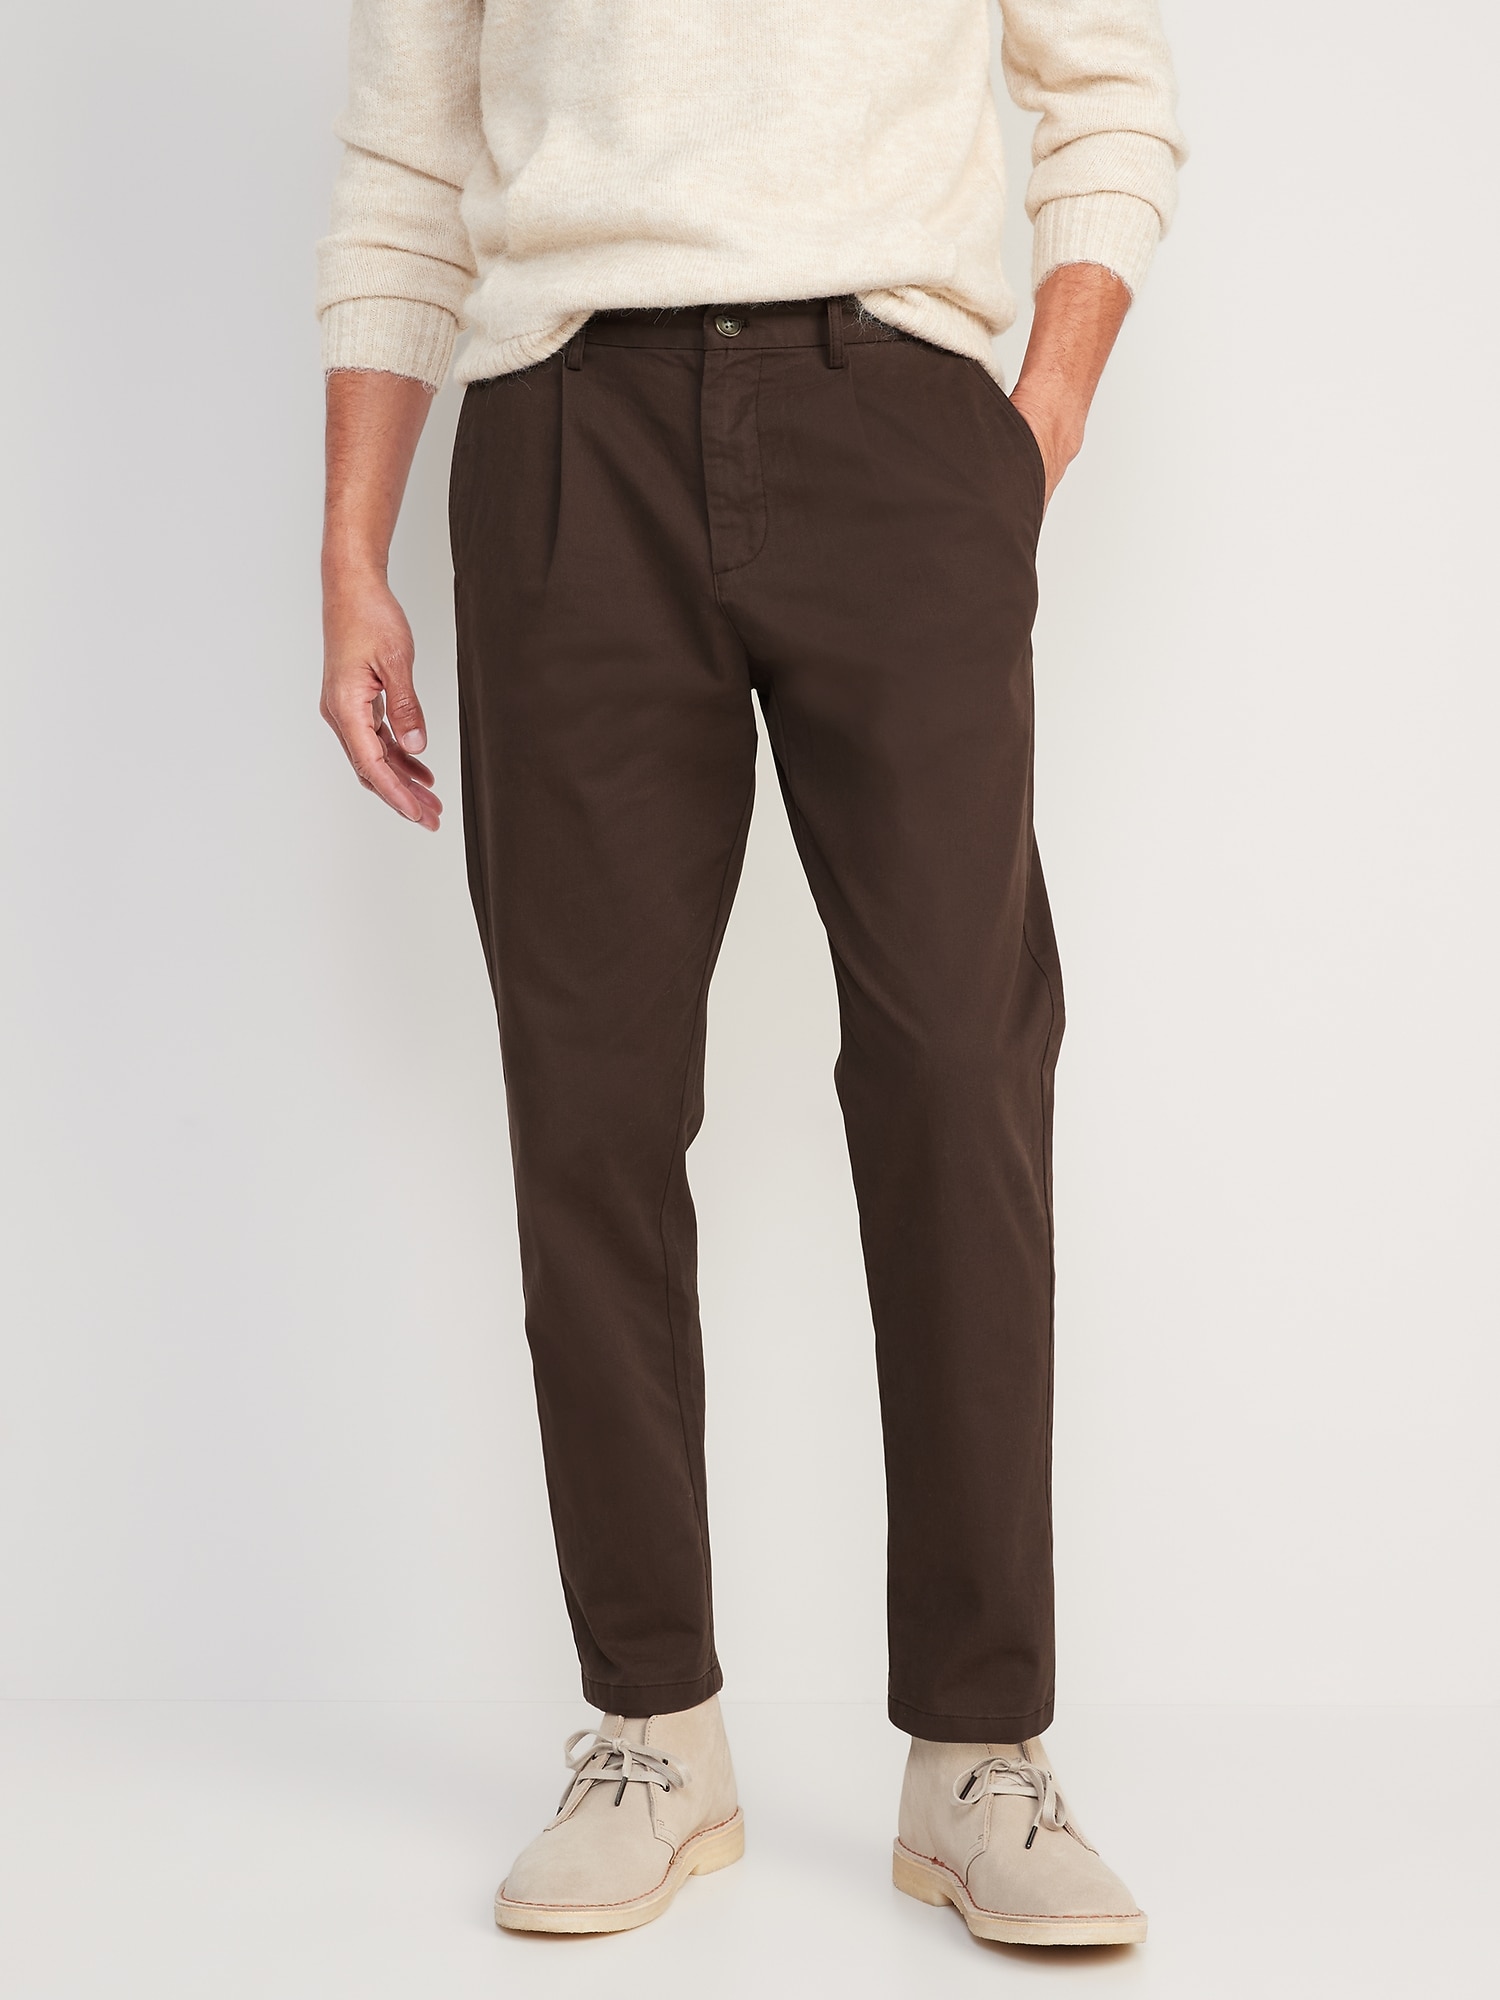 Old Navy Lined Pants | lupon.gov.ph